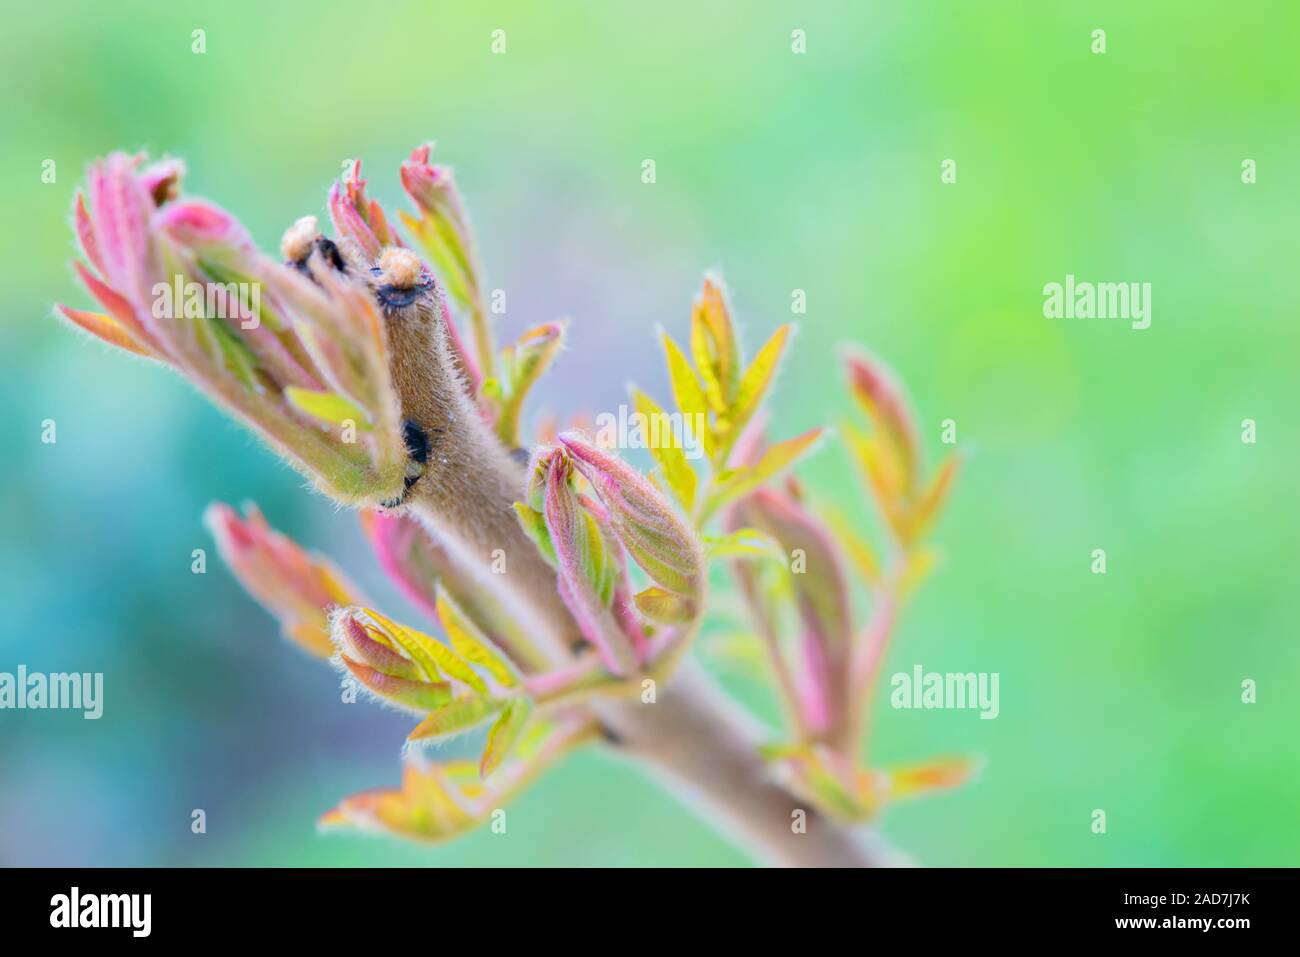 Rhus typhina plant over blurred green background. Shallow depth of field. Stock Photo